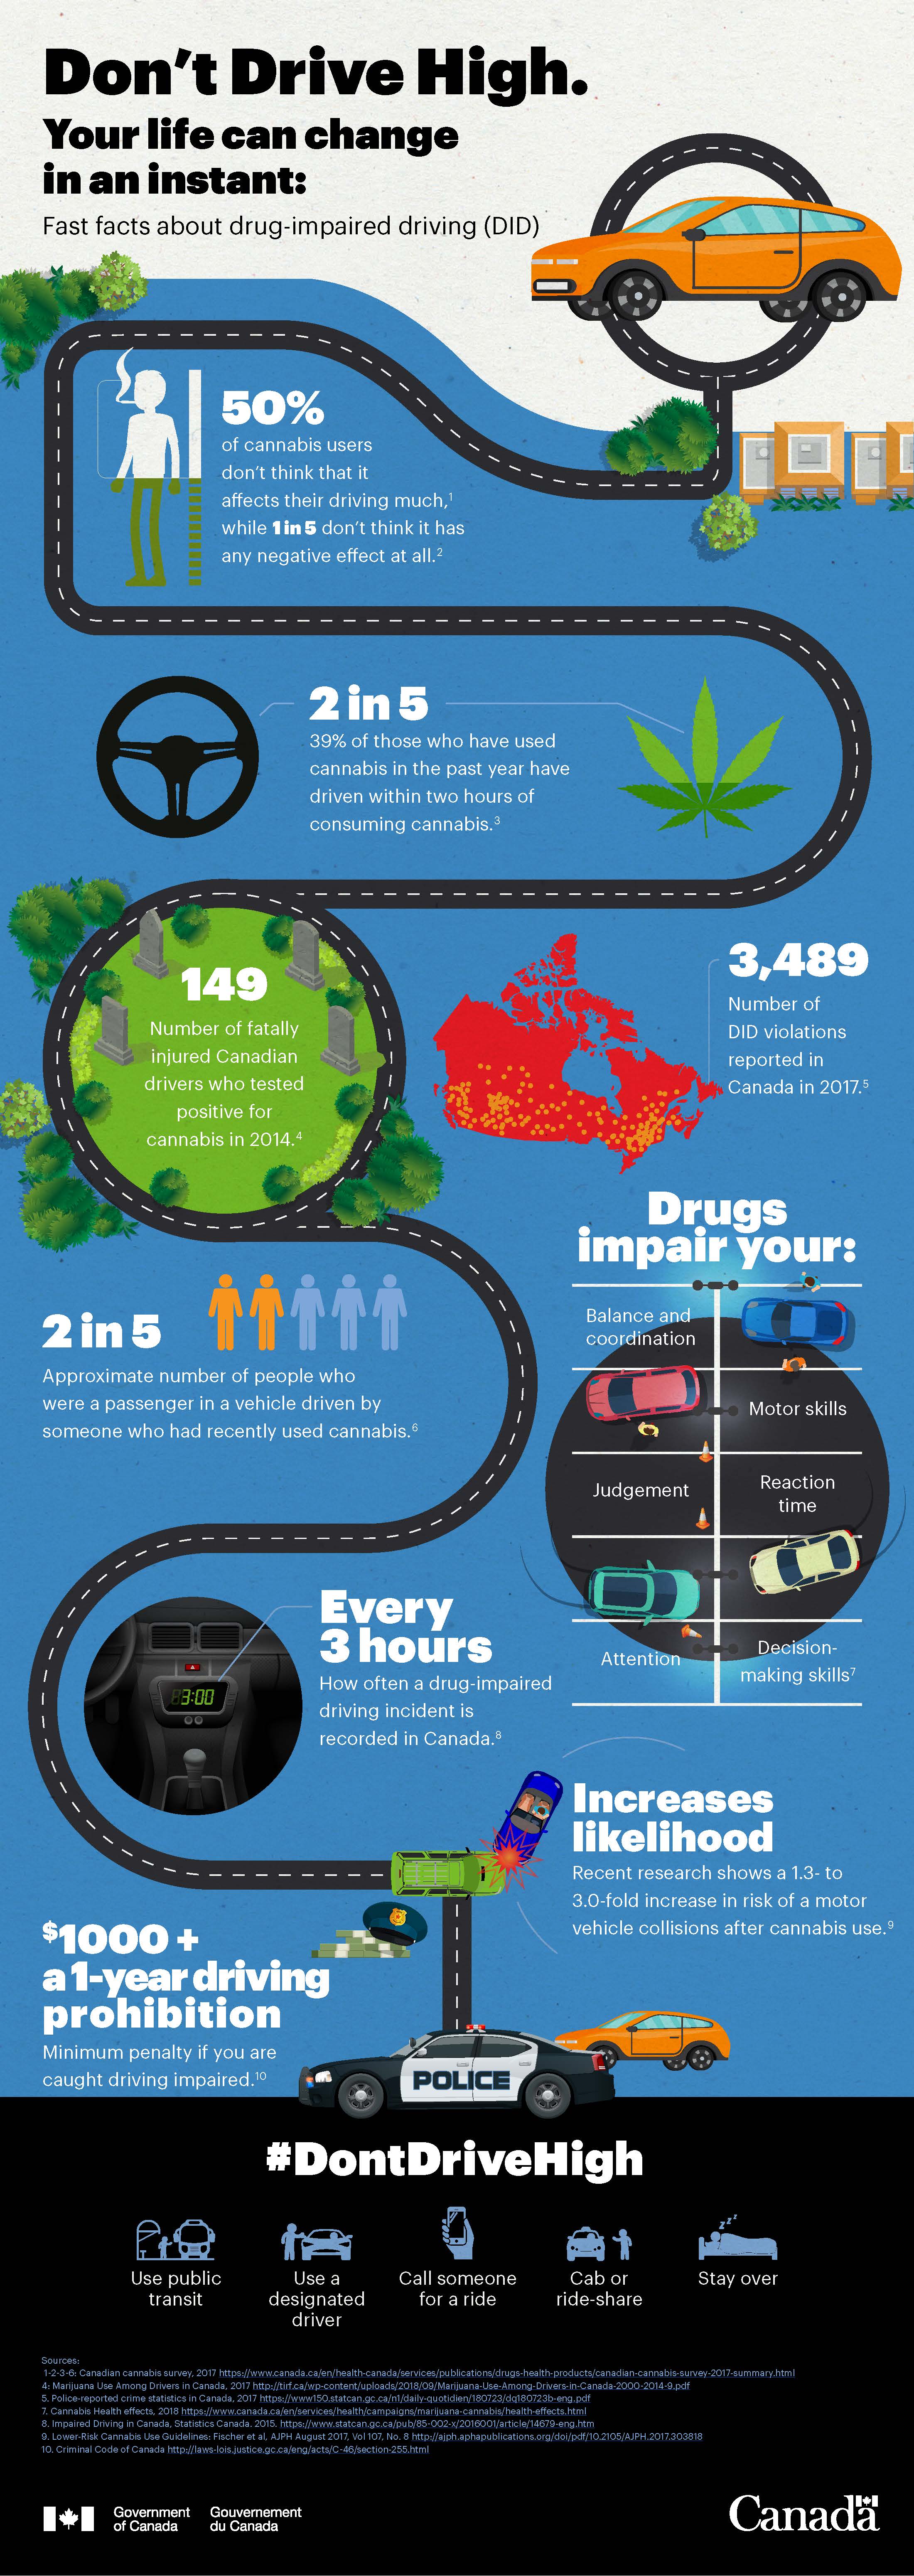 Fast facts about drug-impaired driving (DID)